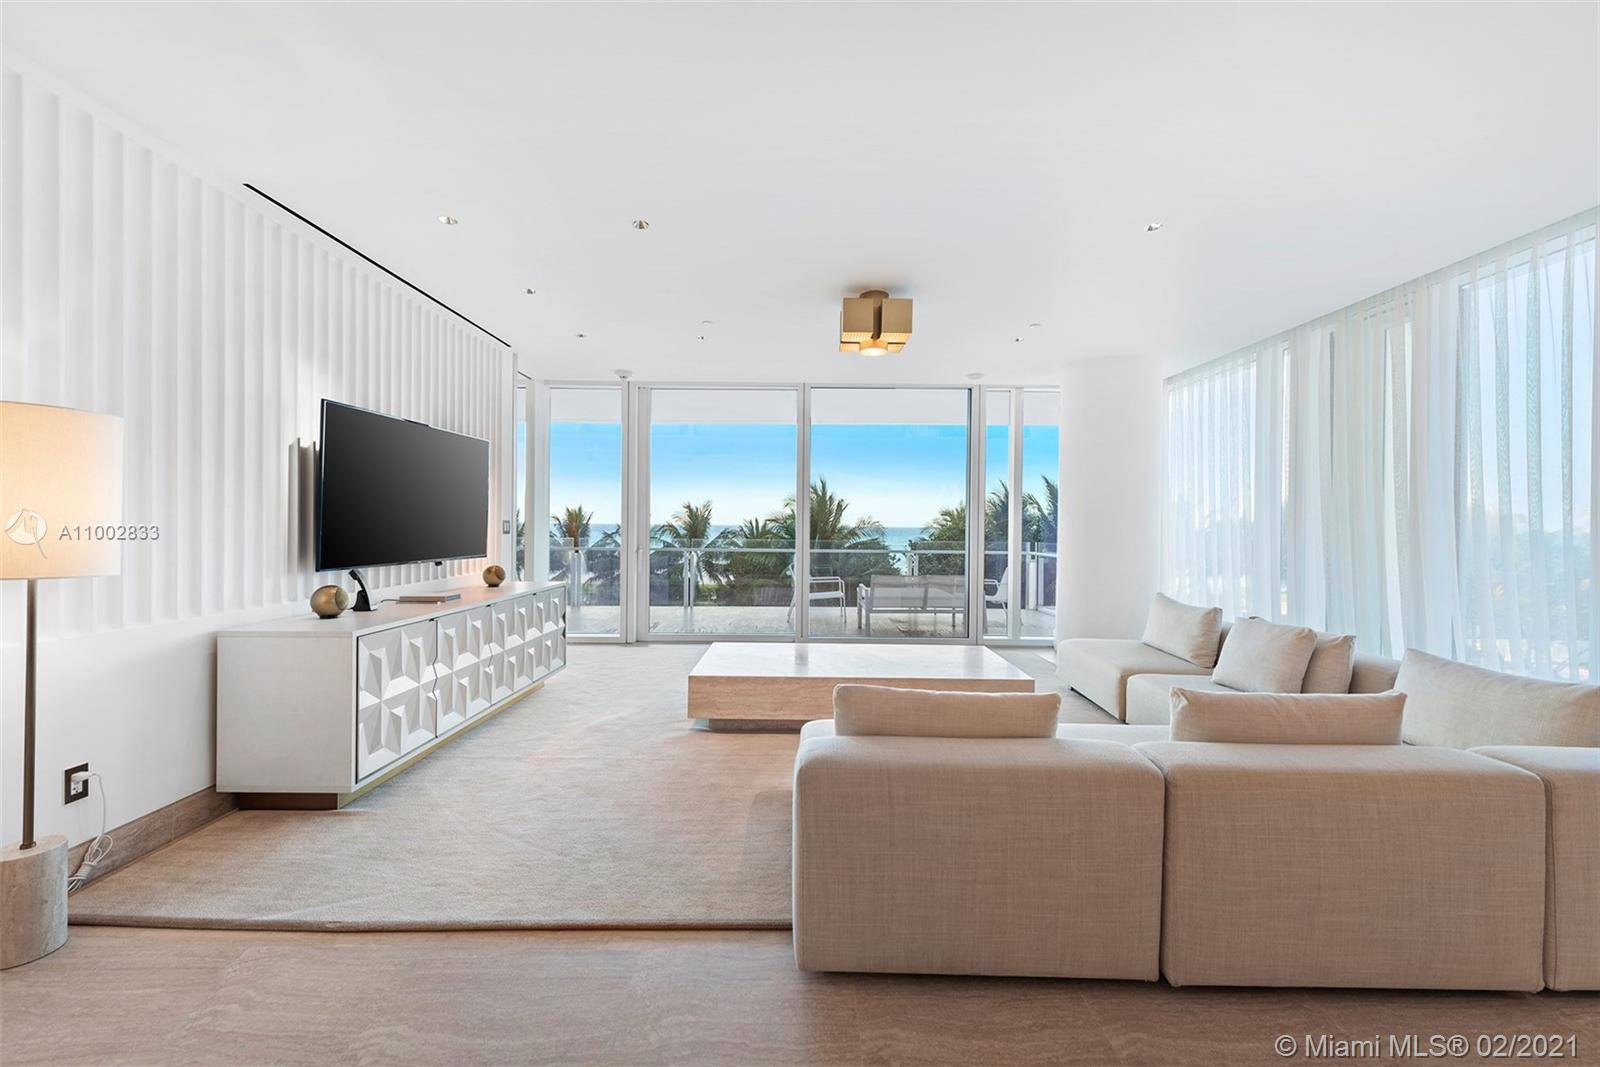 Enjoy FOUR SEASONS HOSPITALITY in this OCEANFRONT 4 Bedroom, 4.